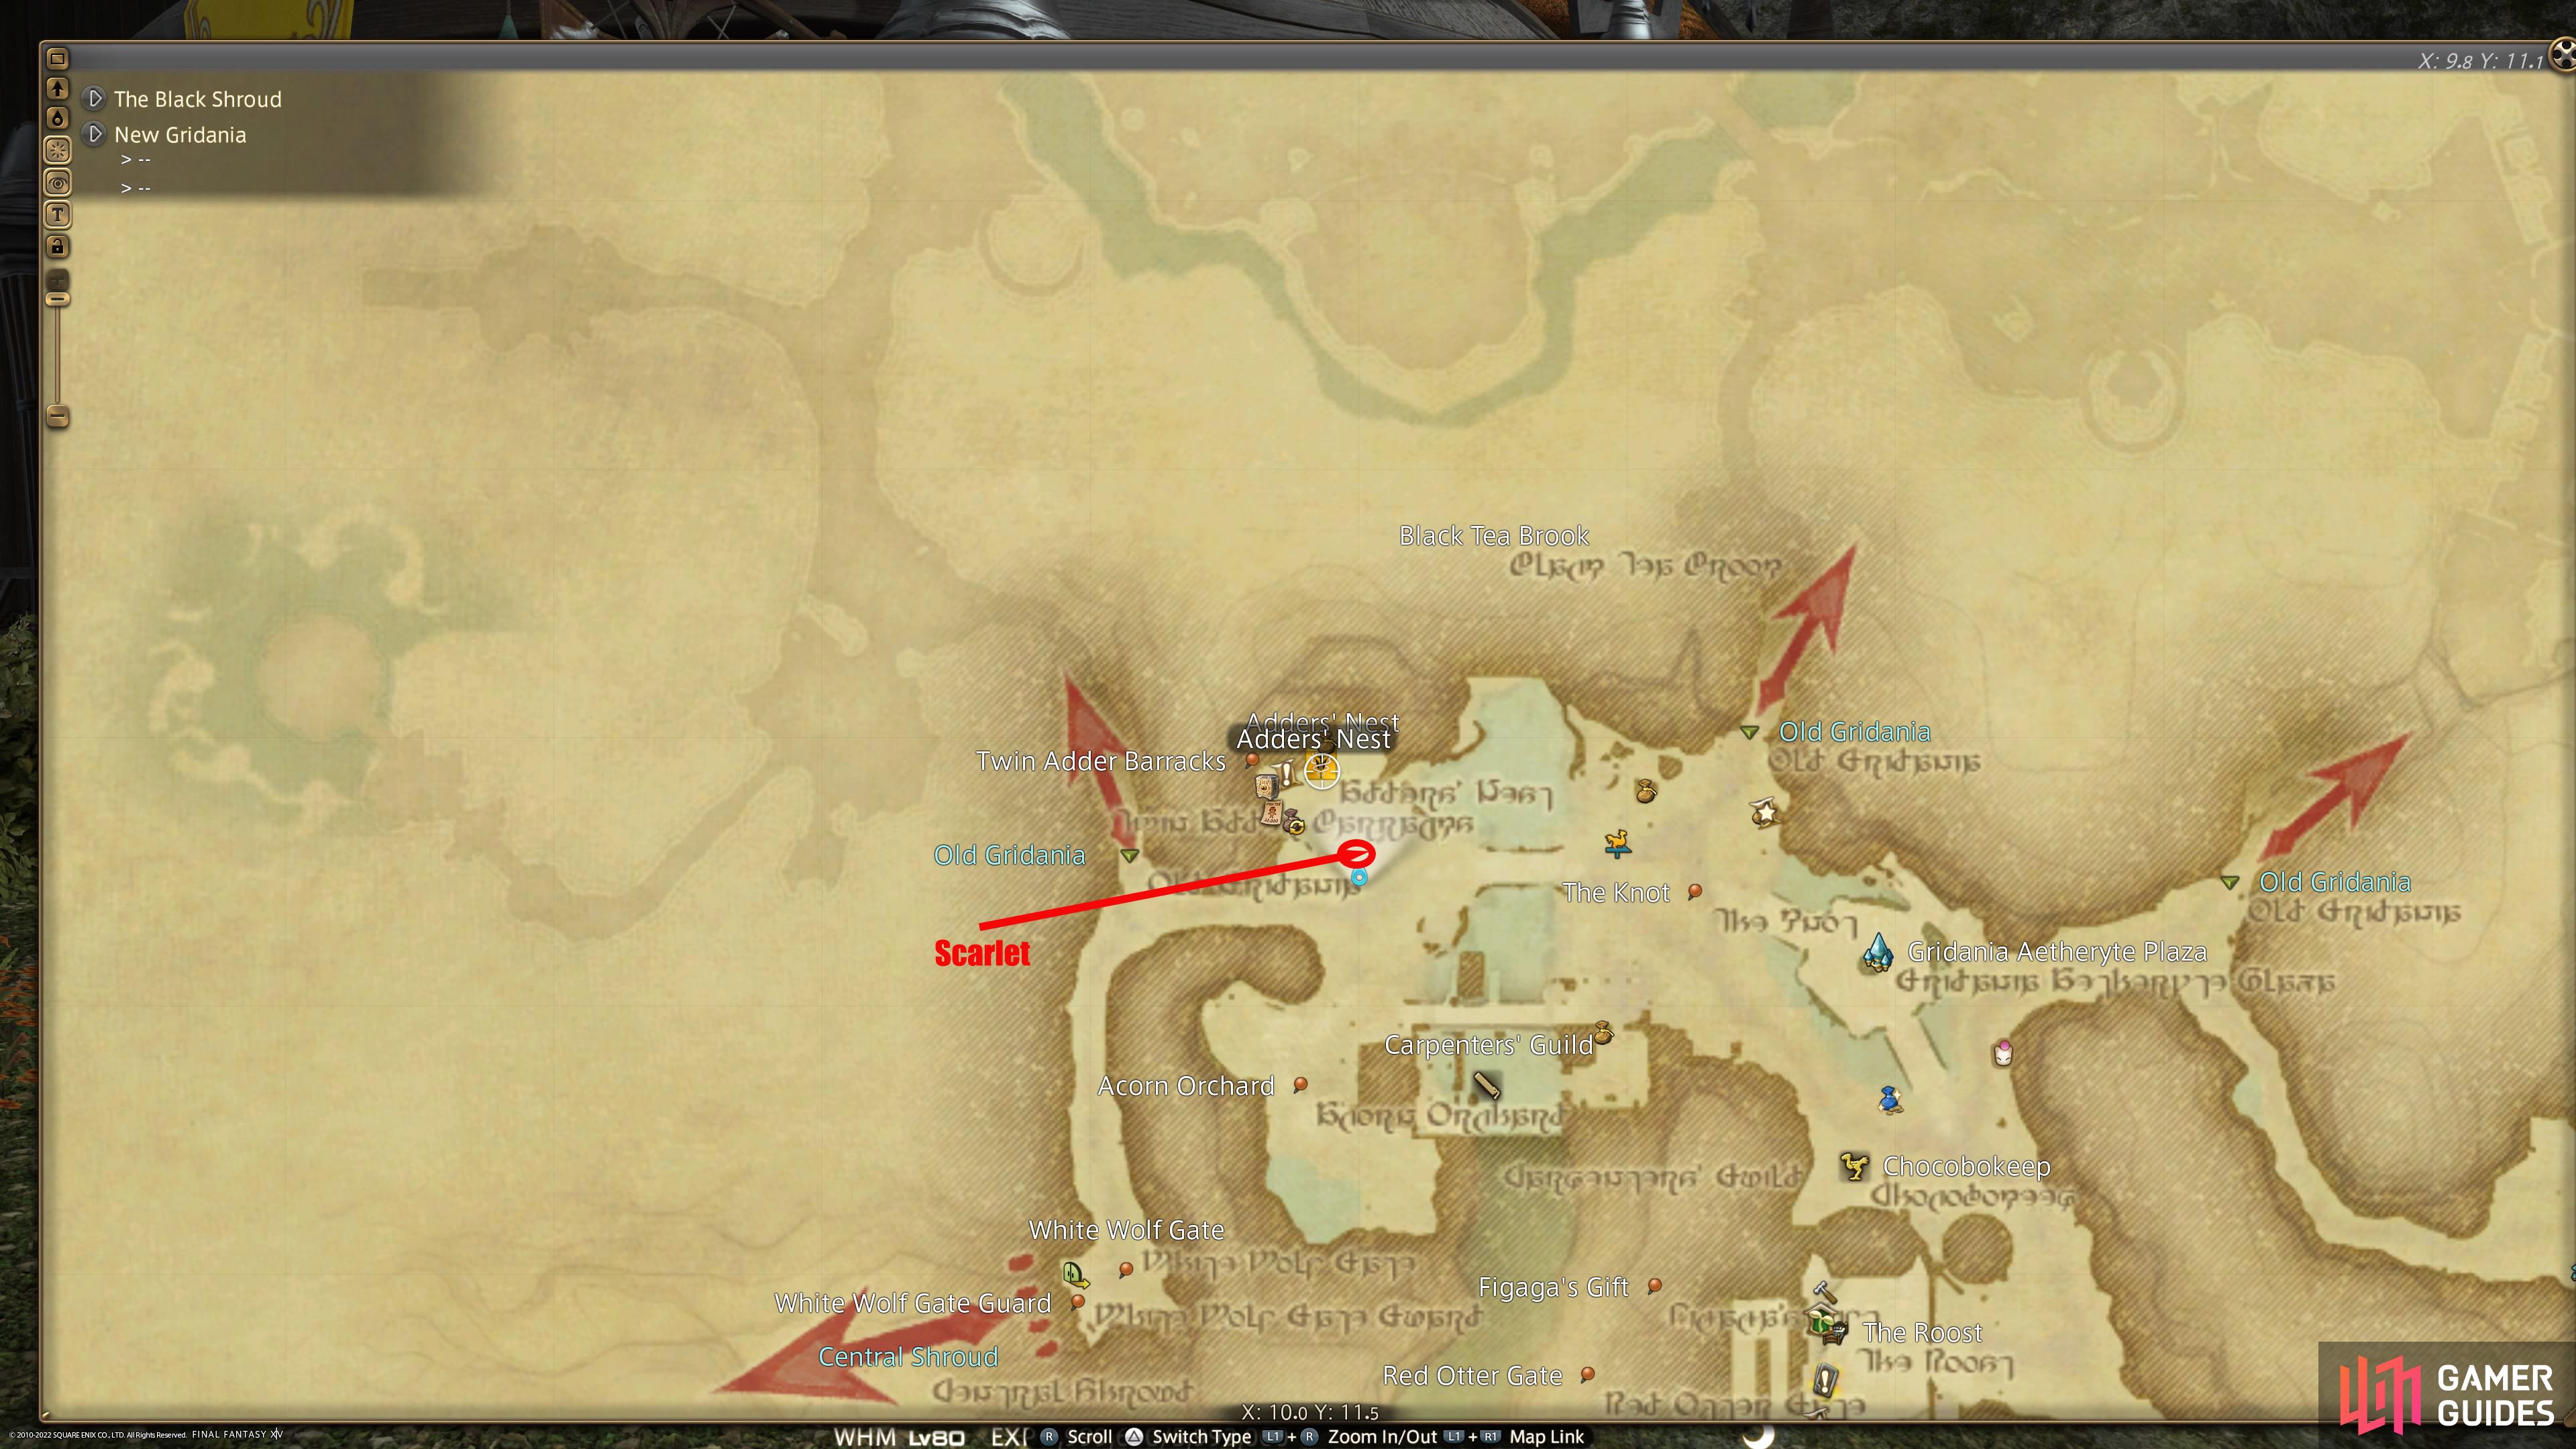 You can find the Twin Adders Command to the west of the main Gridania Aetheryte.